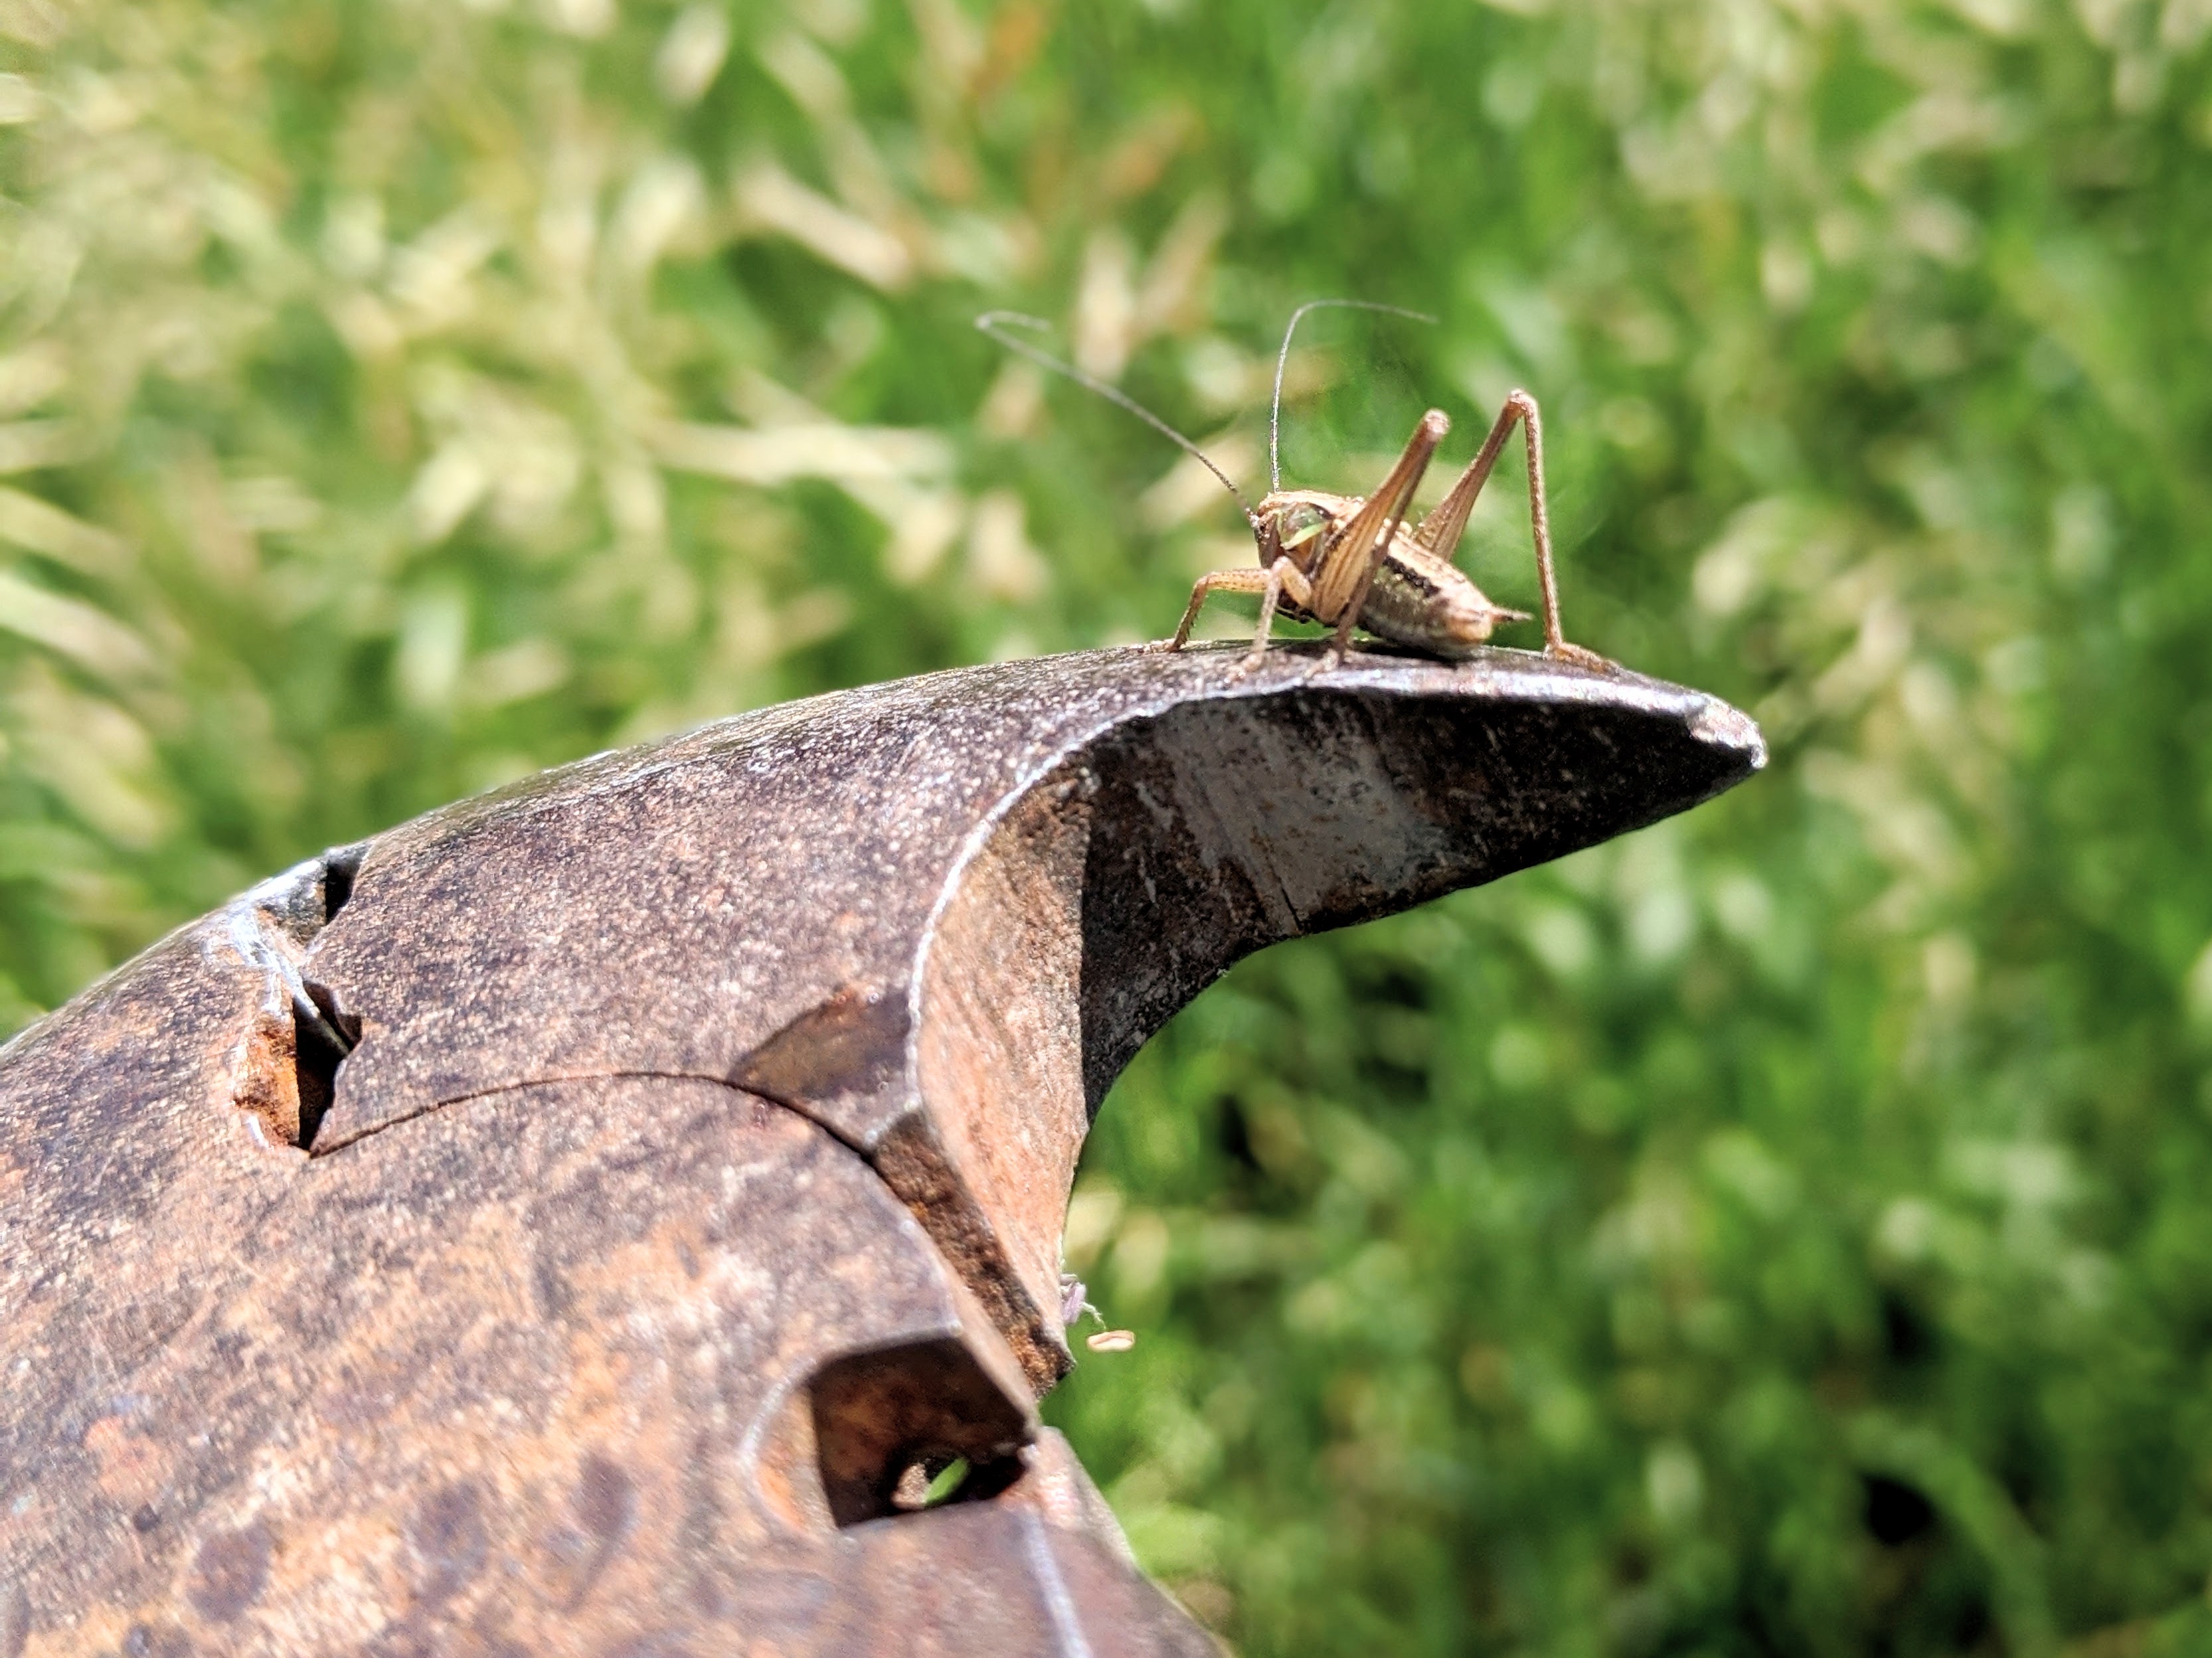 A tiny grasshopper perches on the edge of a pair of fencing pliers.